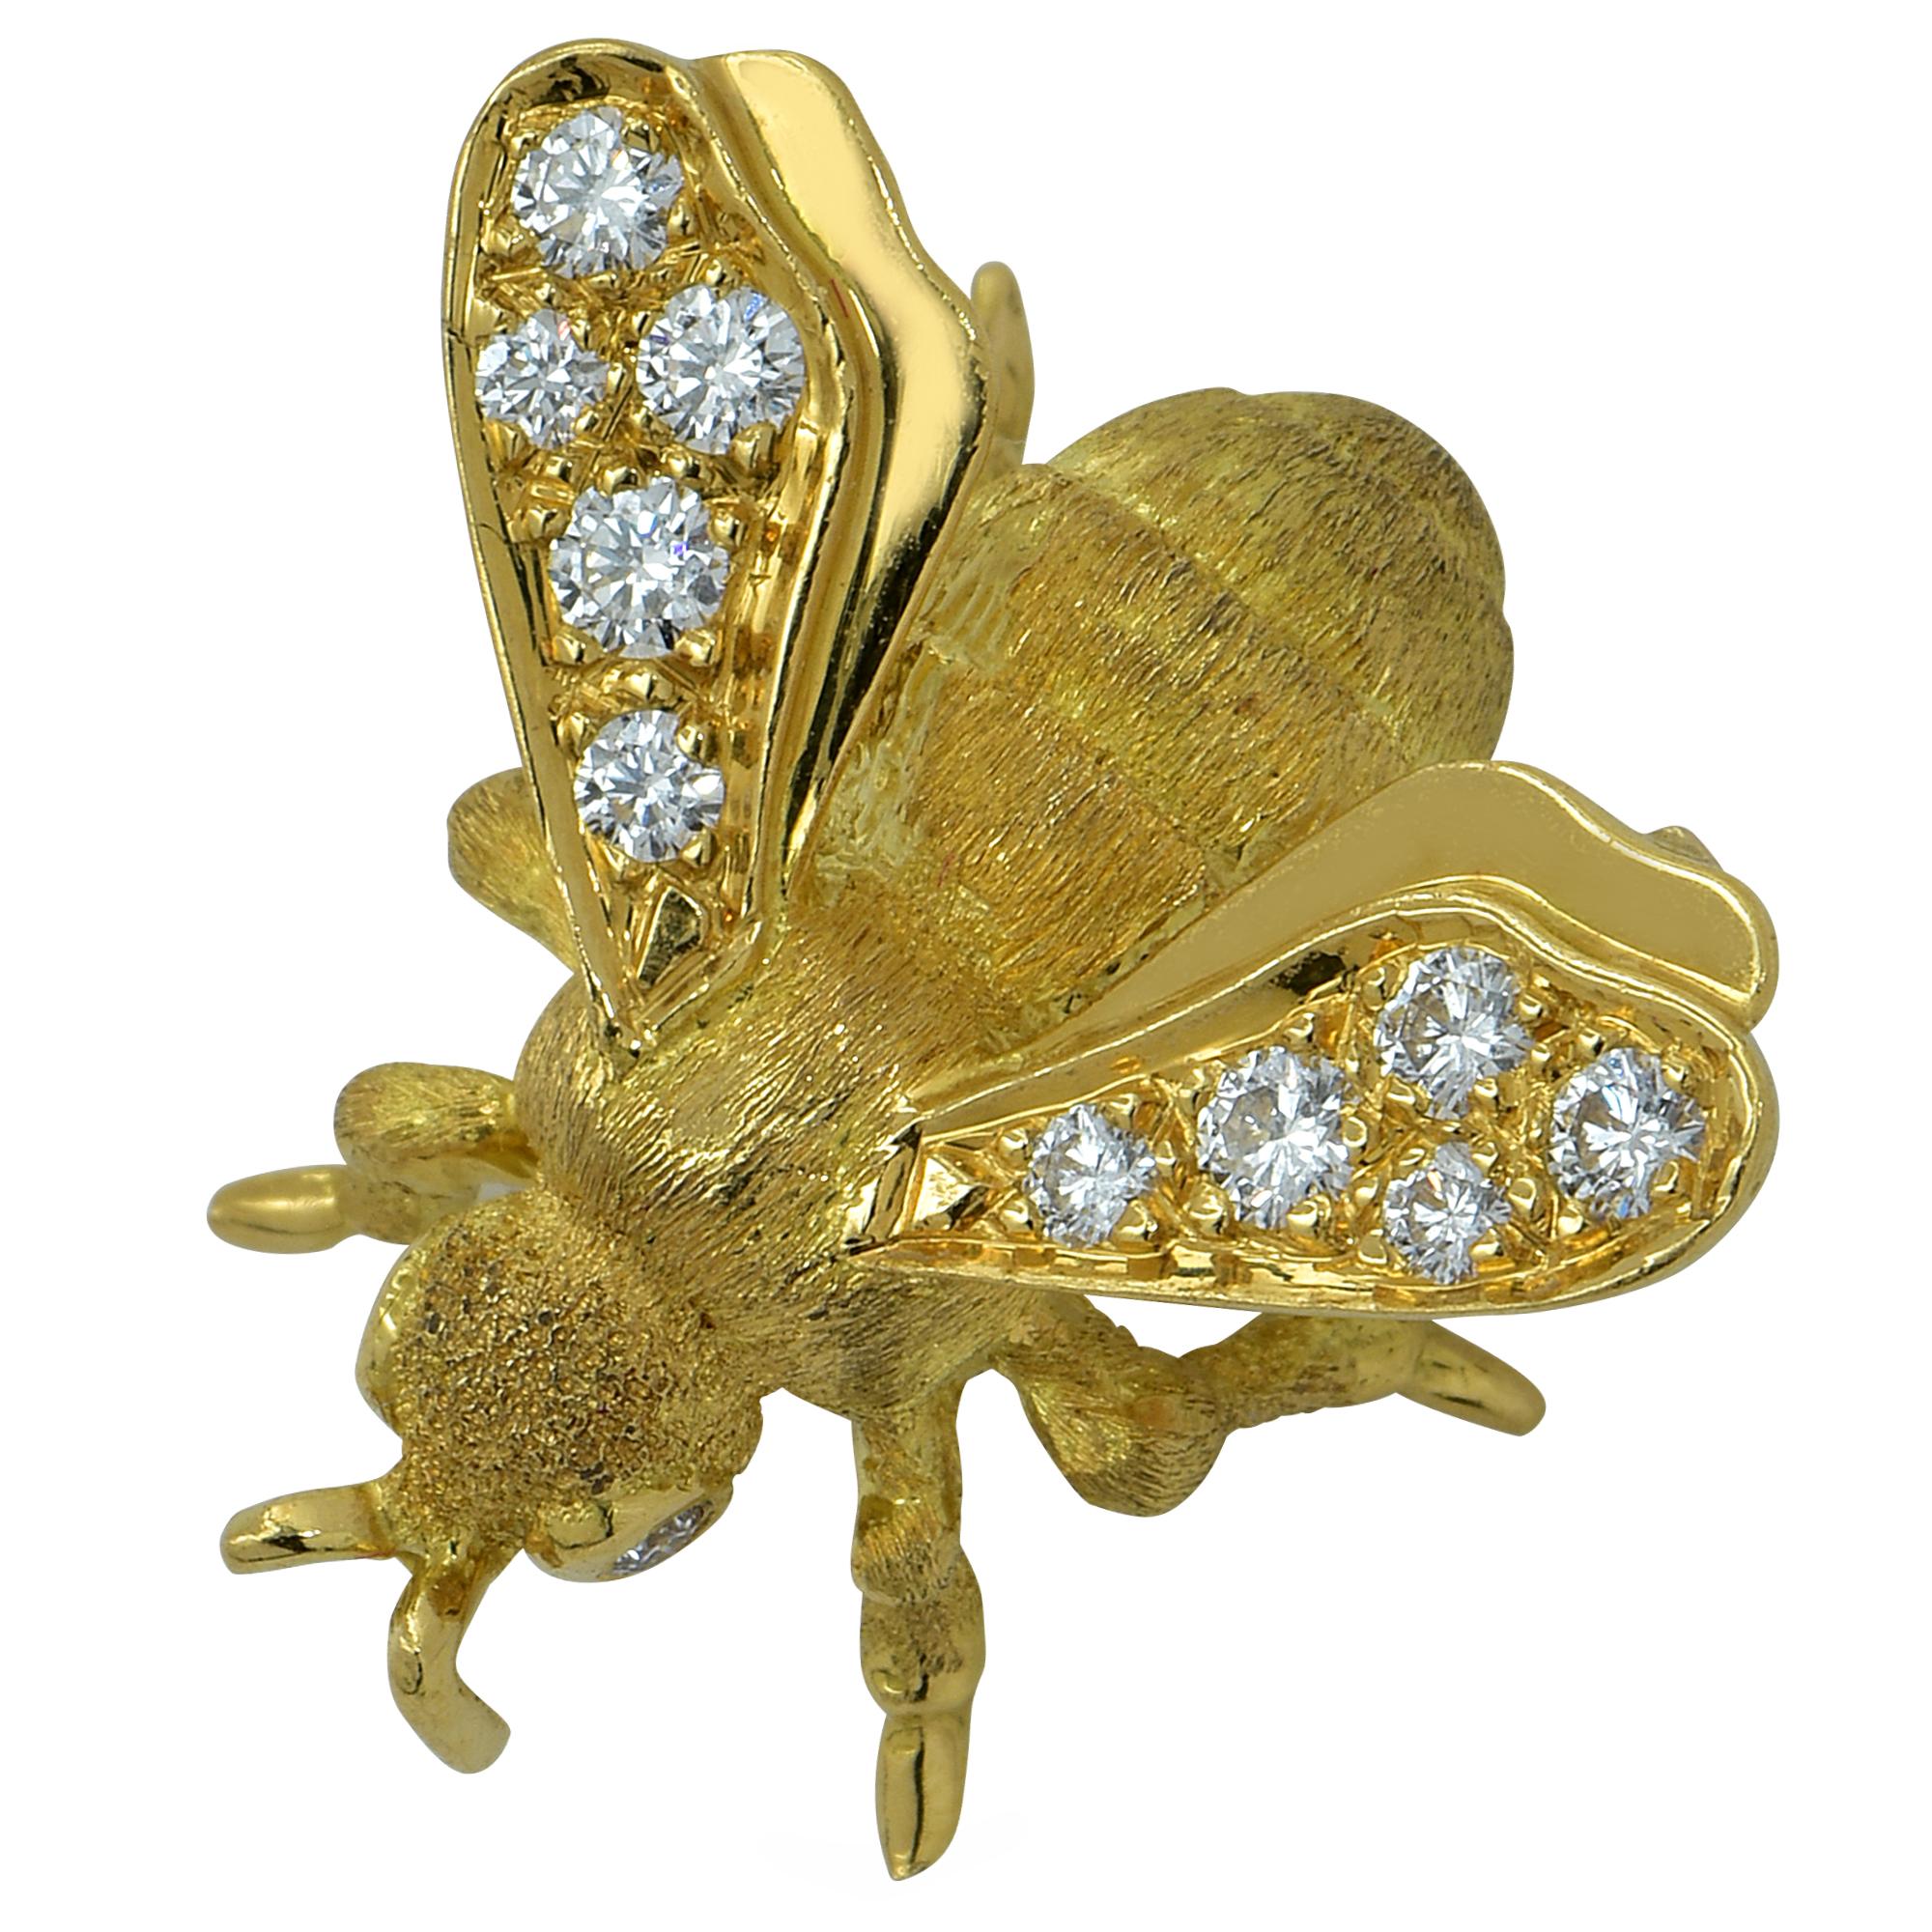 Enchanting Bee brooch pin crafted in 18k Yellow Gold, showcasing 2 round brilliant cut diamond eyes, and wings adorned with 10 round brilliant cut diamonds. The diamond weight is approximately .40cts total G color VS clarity. This beautiful brooch